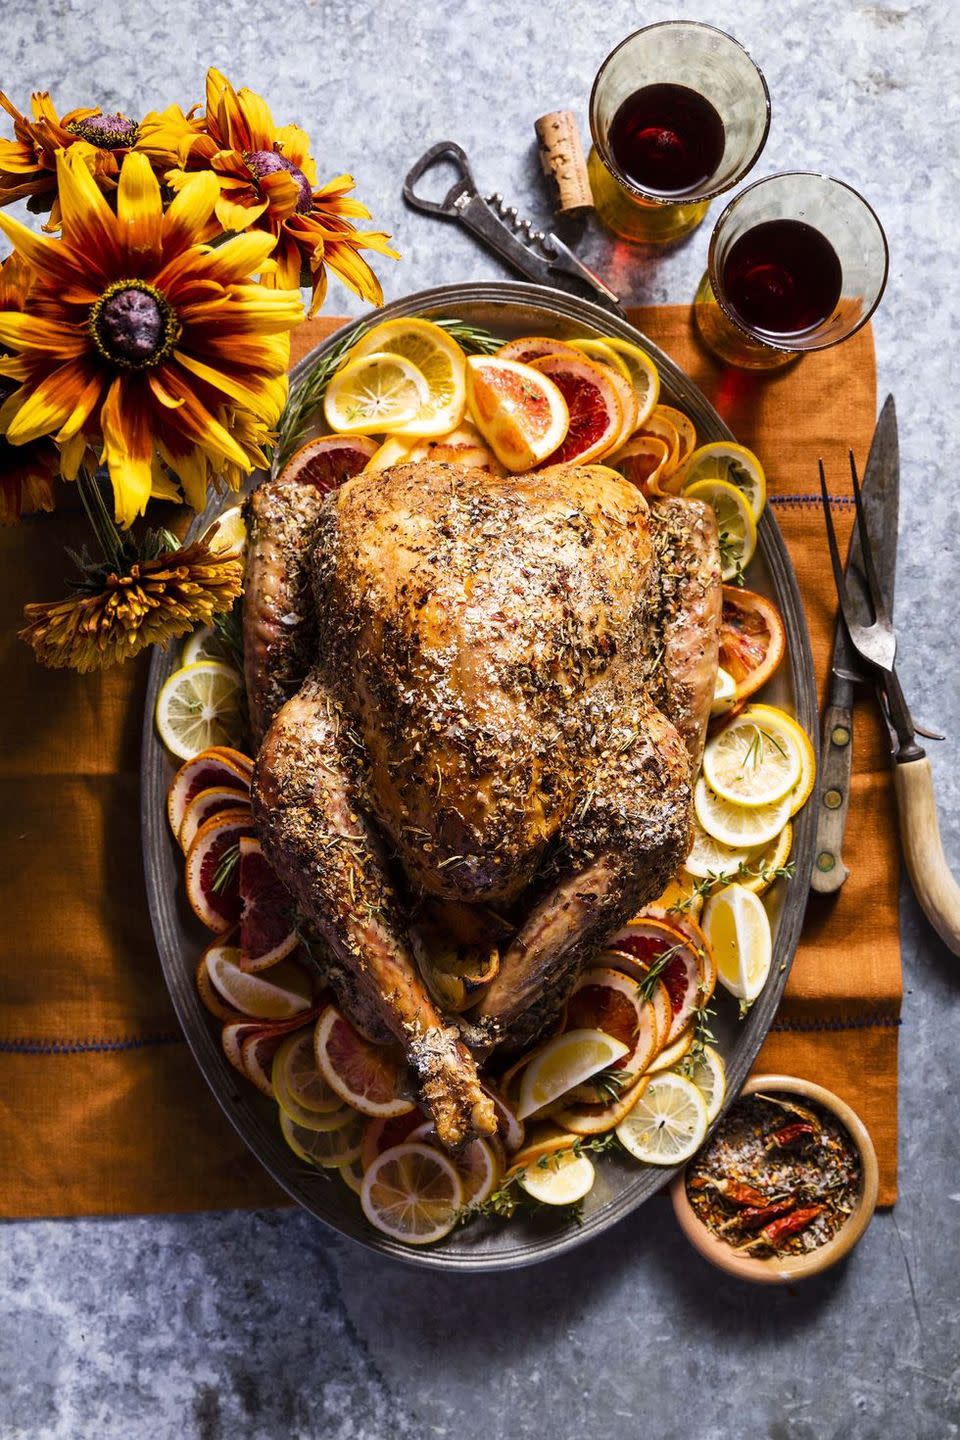 <p>Free up oven space and take the turkey cooking outside!</p><p>Get the <a href="https://www.countryliving.com/food-drinks/a34276514/grilled-citrus-and-spice-turkey/" rel="nofollow noopener" target="_blank" data-ylk="slk:Grilled Citrus-and-Spice Turkey recipe" class="link "><strong>Grilled Citrus-and-Spice Turkey recipe</strong></a> from Country Living.</p><p><strong>RELATED: </strong><a href="https://www.goodhousekeeping.com/food-recipes/g413/great-grilling-recipes/" rel="nofollow noopener" target="_blank" data-ylk="slk:70 Insanely Delicious Grilling Recipes to Try ASAP" class="link ">70 Insanely Delicious Grilling Recipes to Try ASAP</a><br></p>